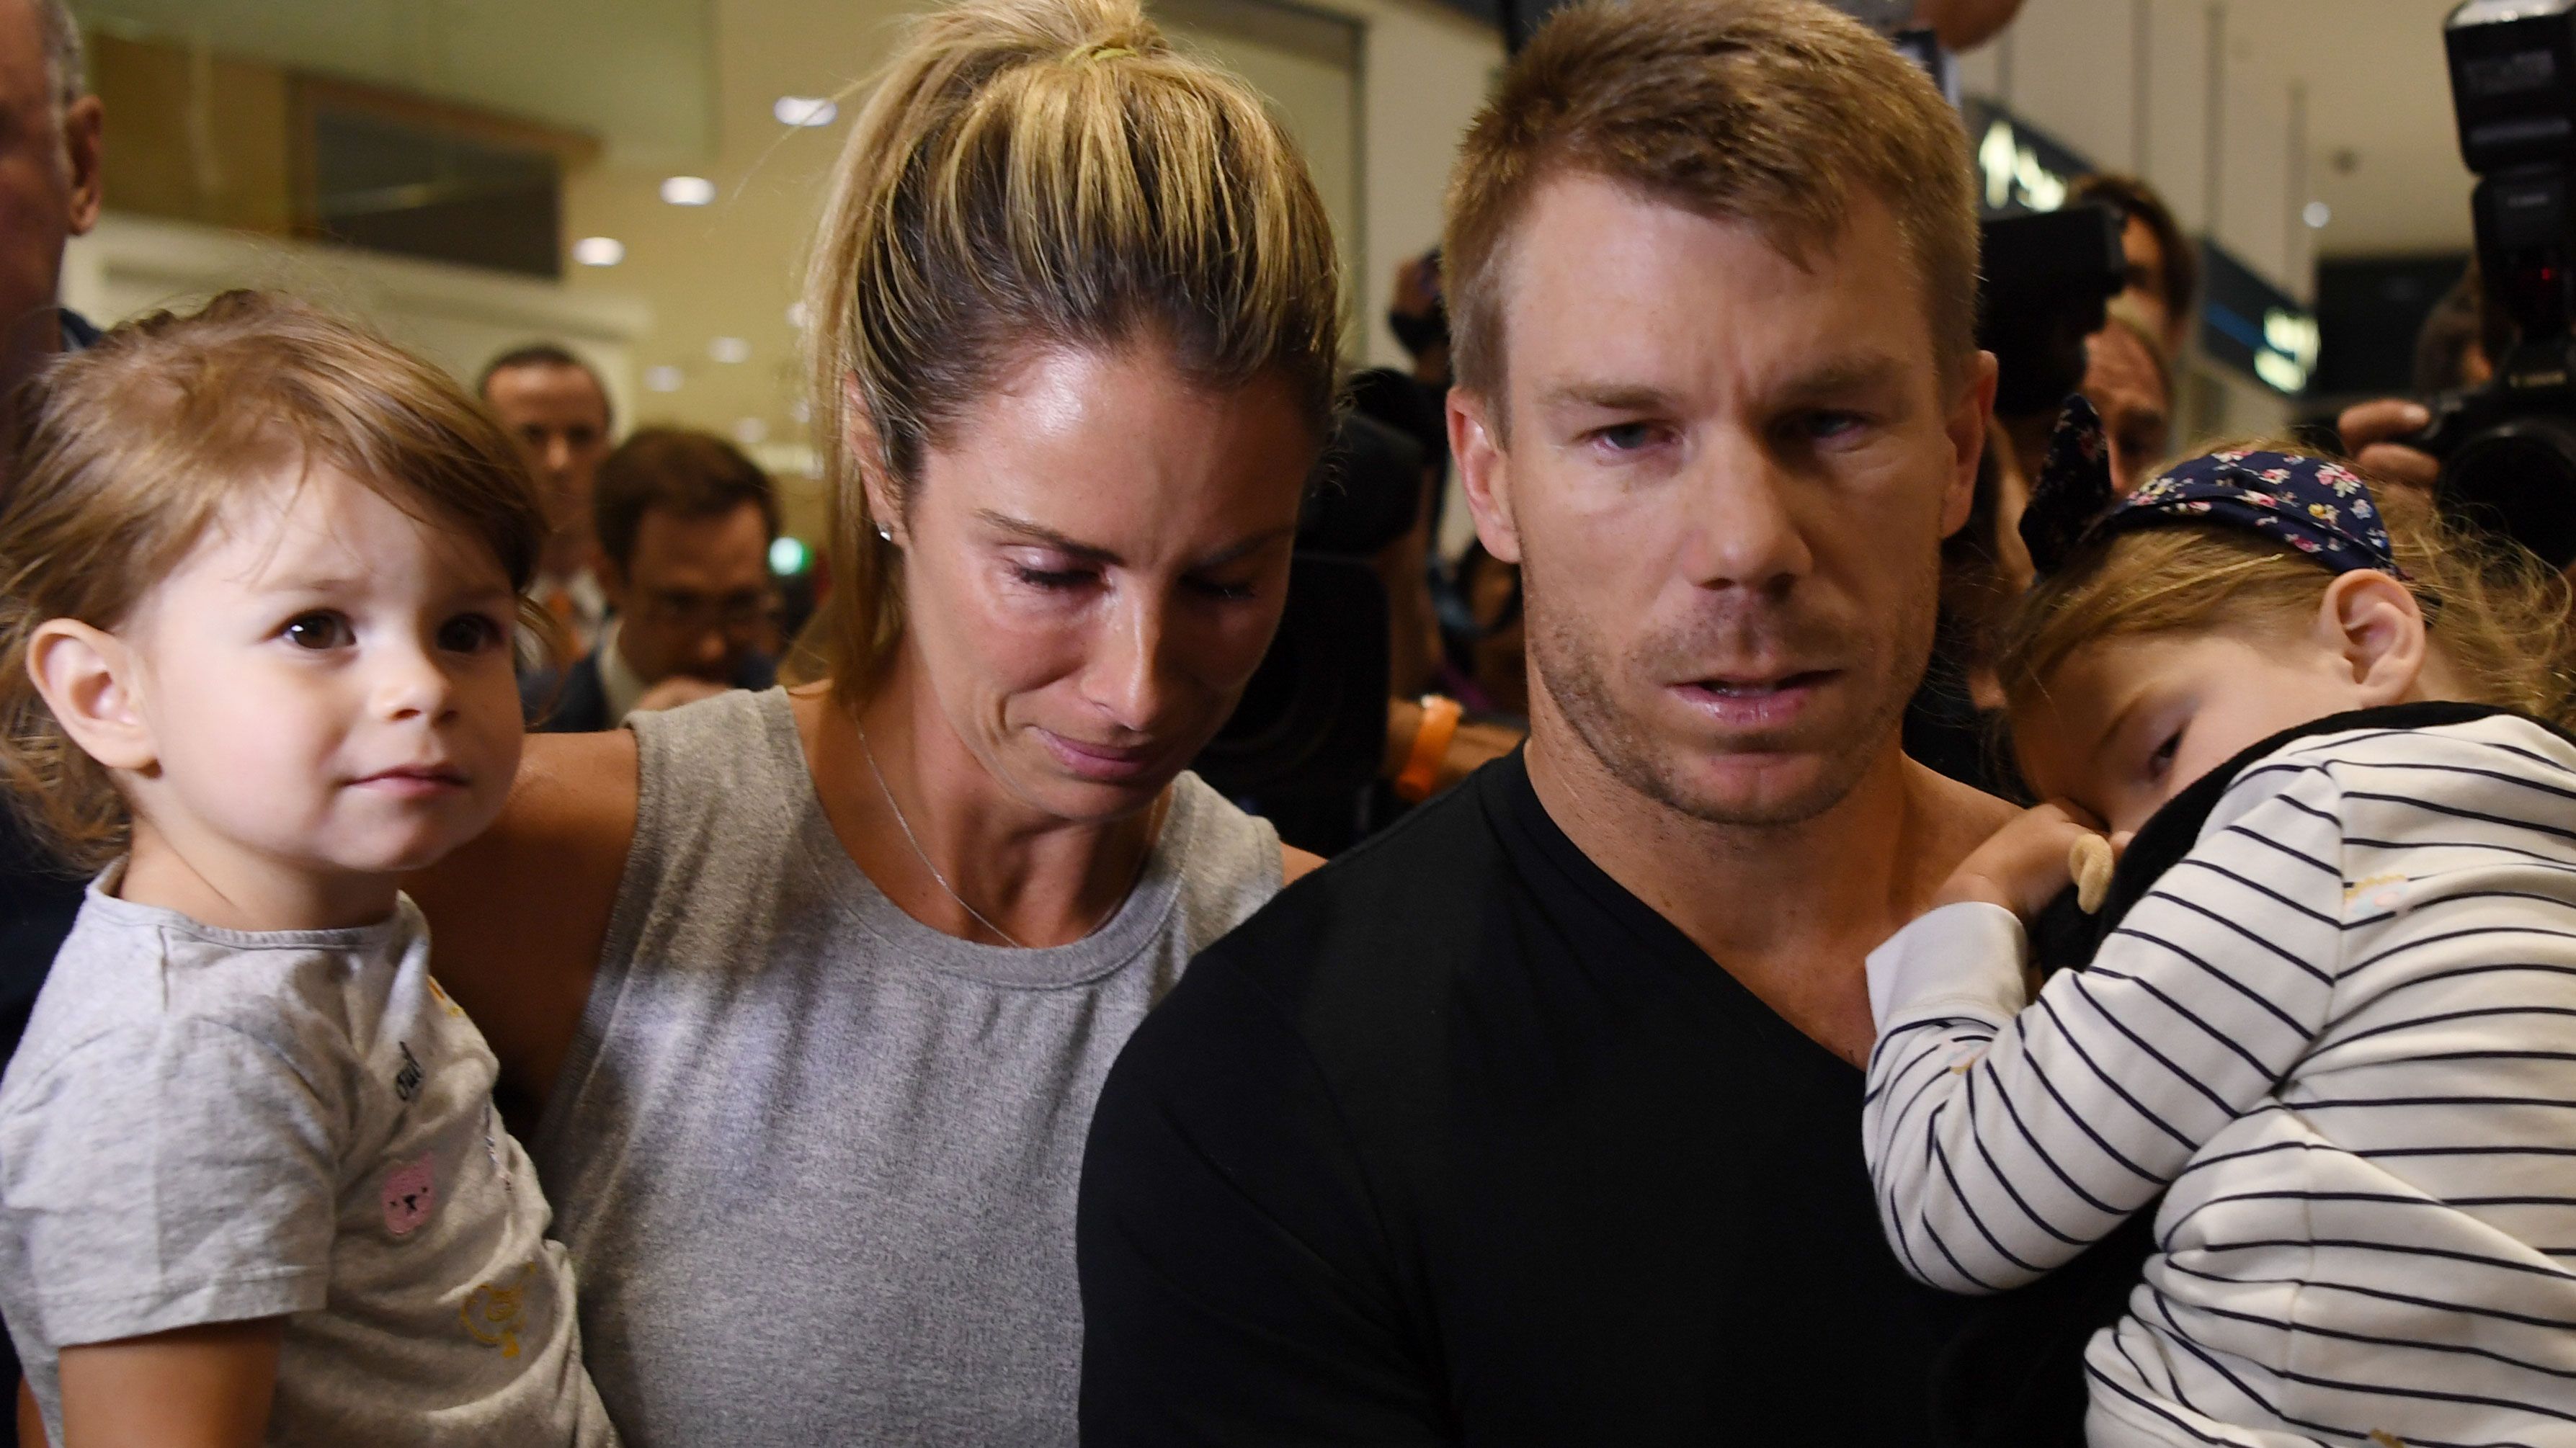 Candice Warner reveals the struggles of husband David since the ball-tampering ban